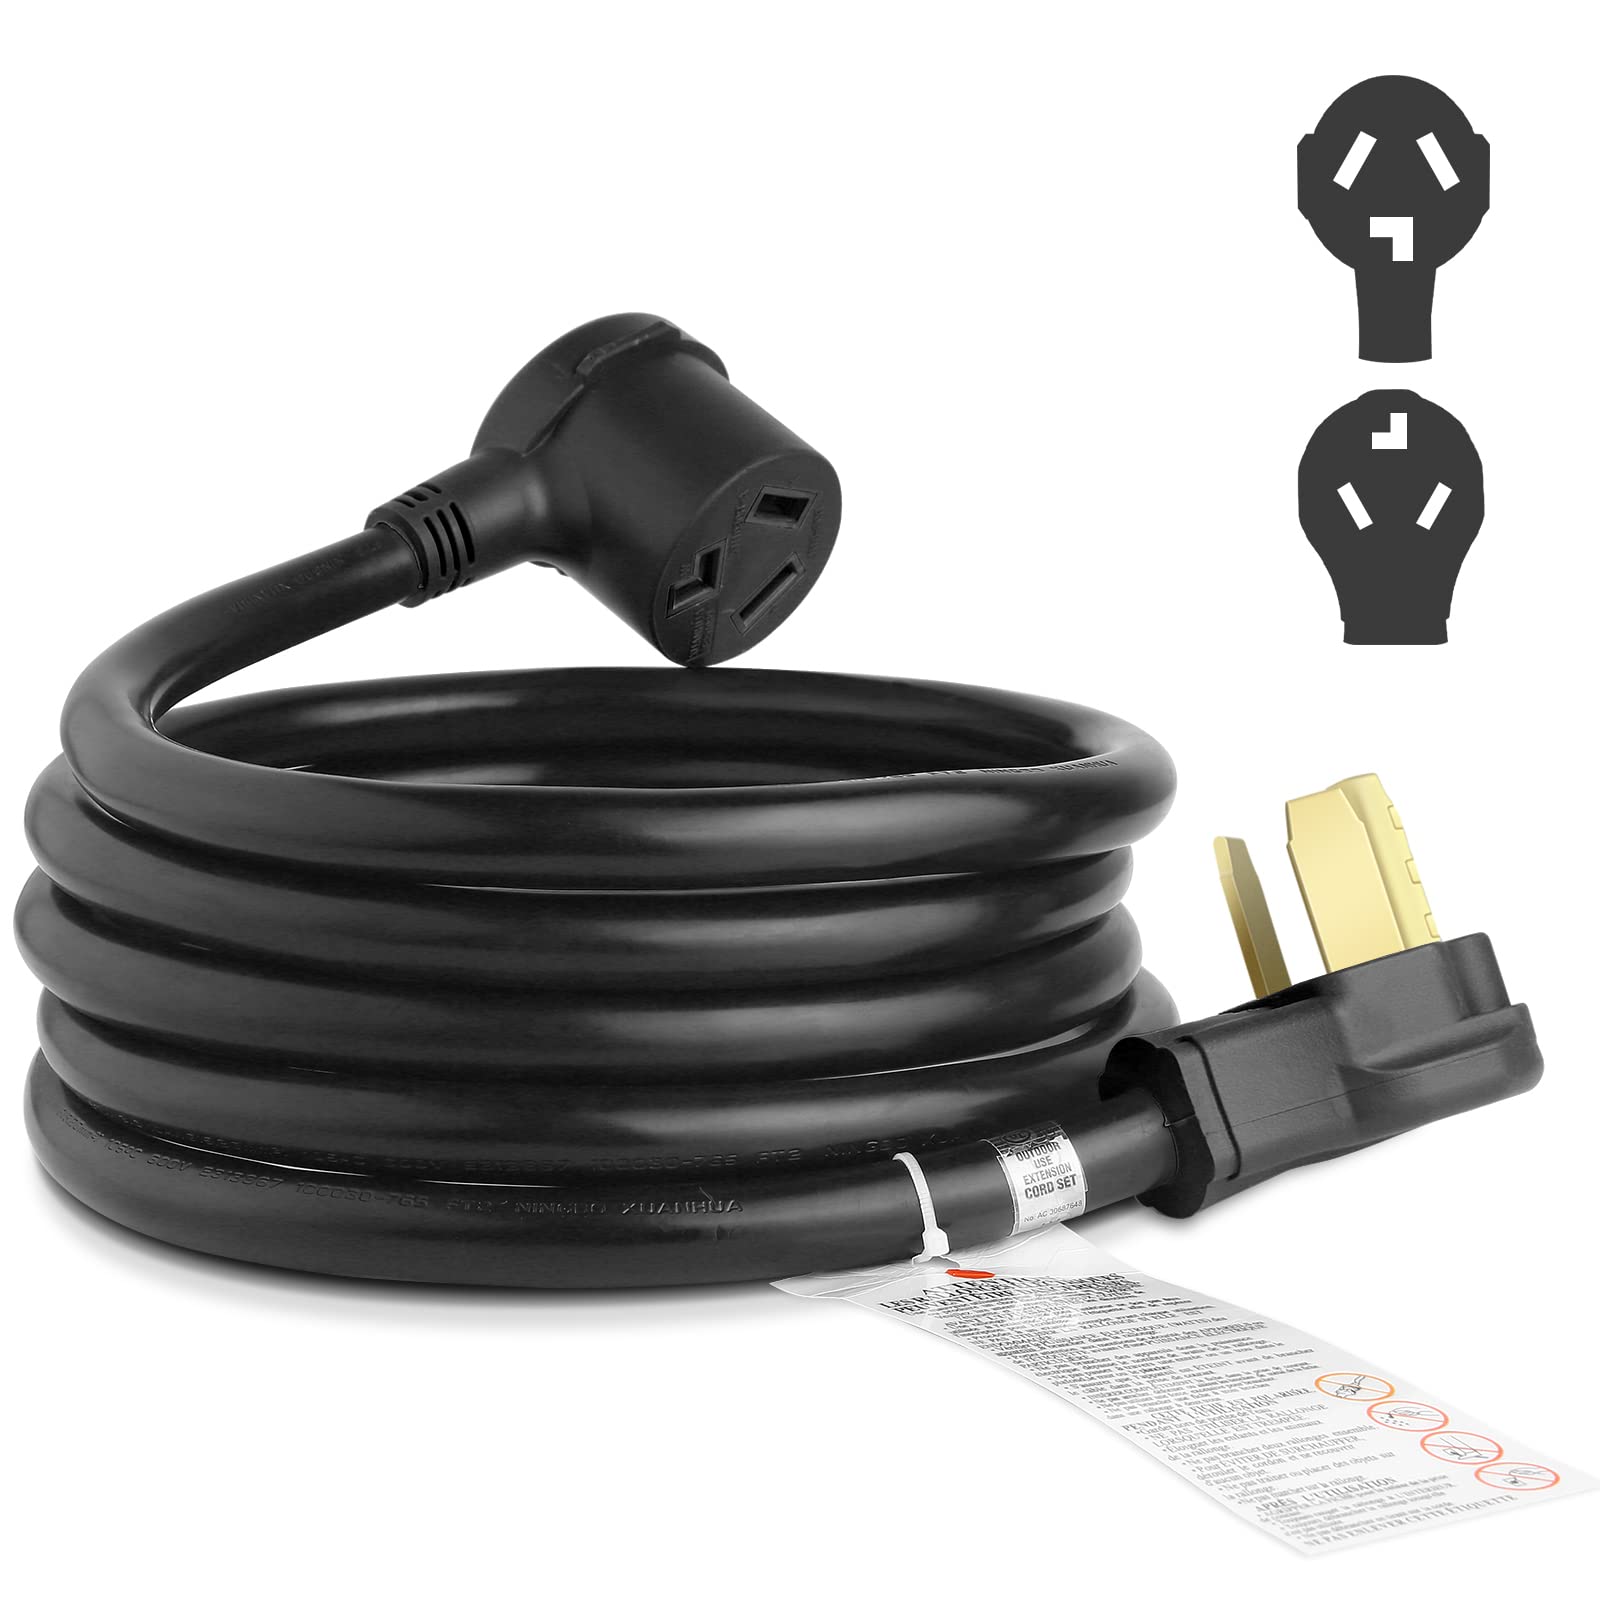 Clothes Dryer Power Cord 3 Prong Wire 30 Amp 5' Foot 10/3 Gauge Wire Heavy Duty